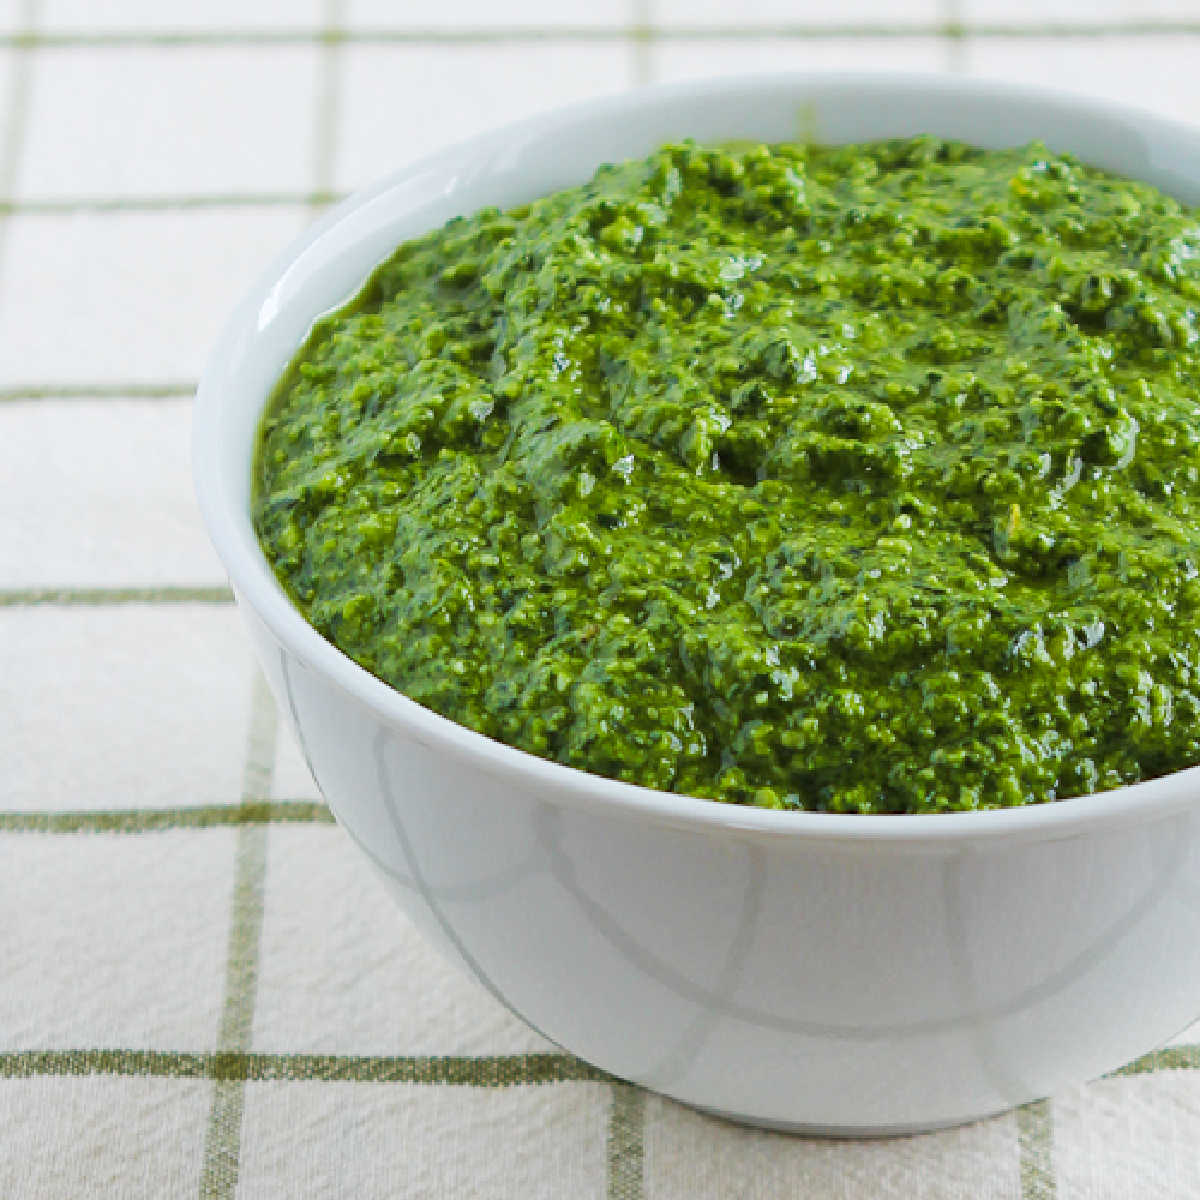 square image of Spinach and Basil Pesto in white bowl